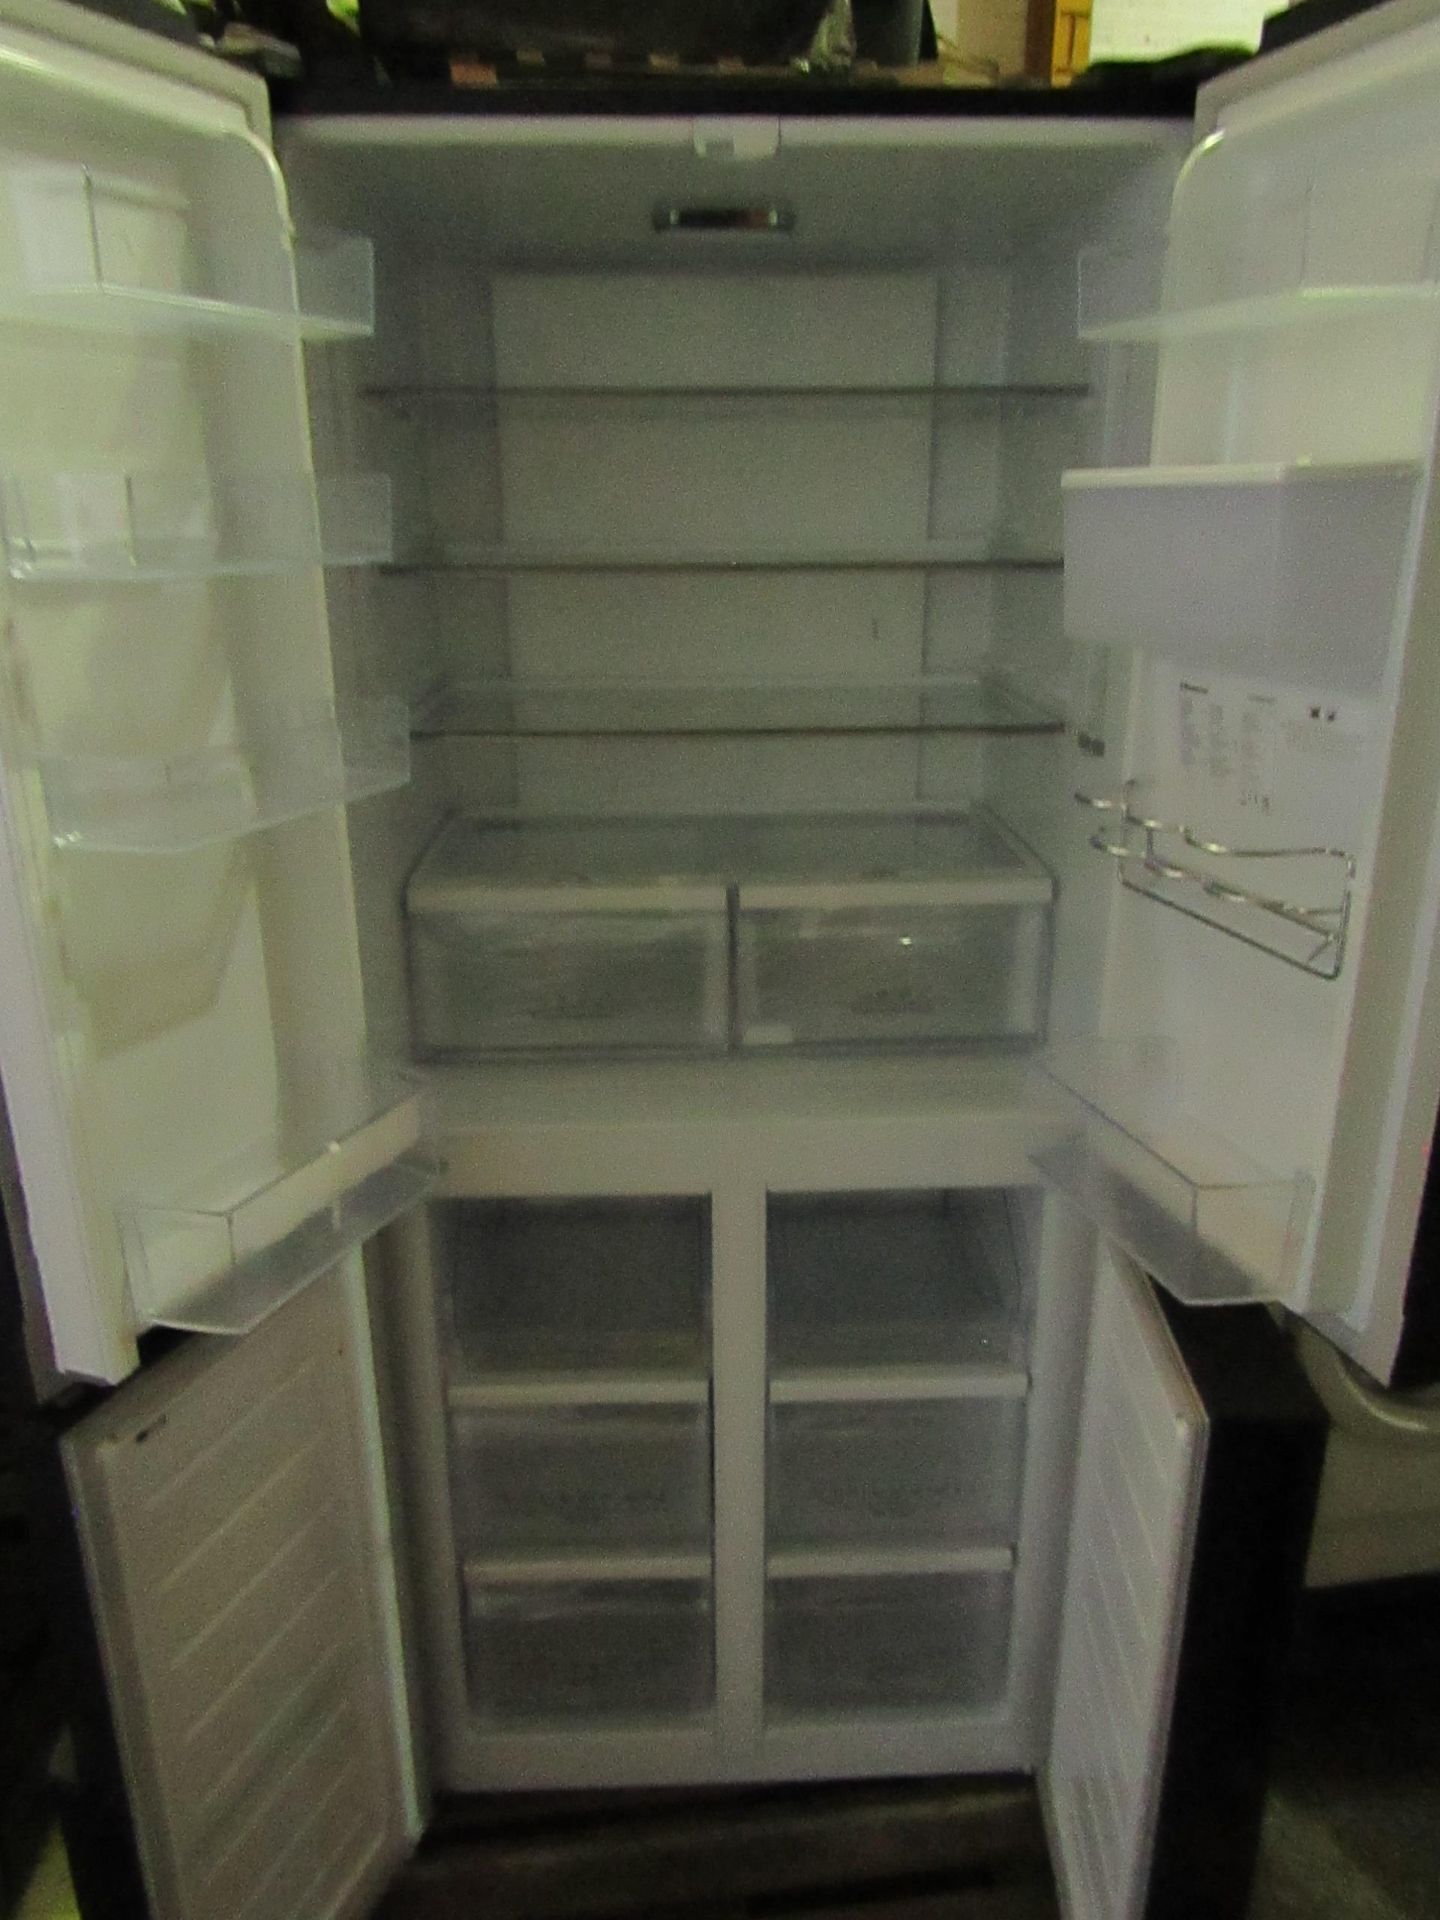 HISENSE American Fridge Freezer Black RQ560N4WBI RRP ??600.00 - The items in this lot are thought to - Image 2 of 4